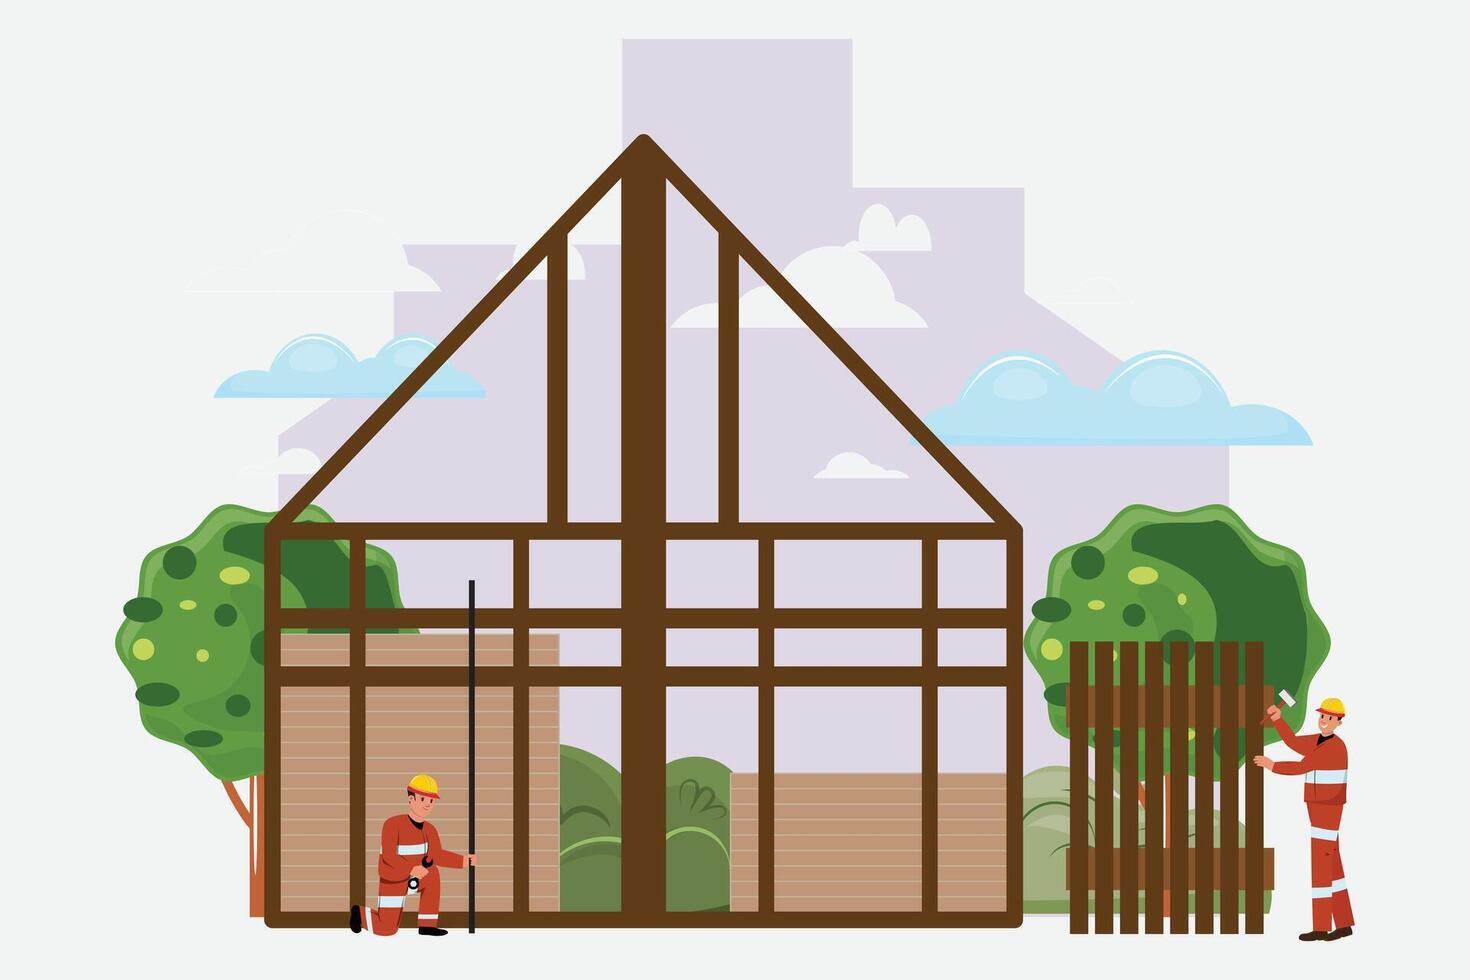 Workers in helmets and uniform construct a house against the backdrop of urban and natural landscapes. Construction, building, estate concept vector